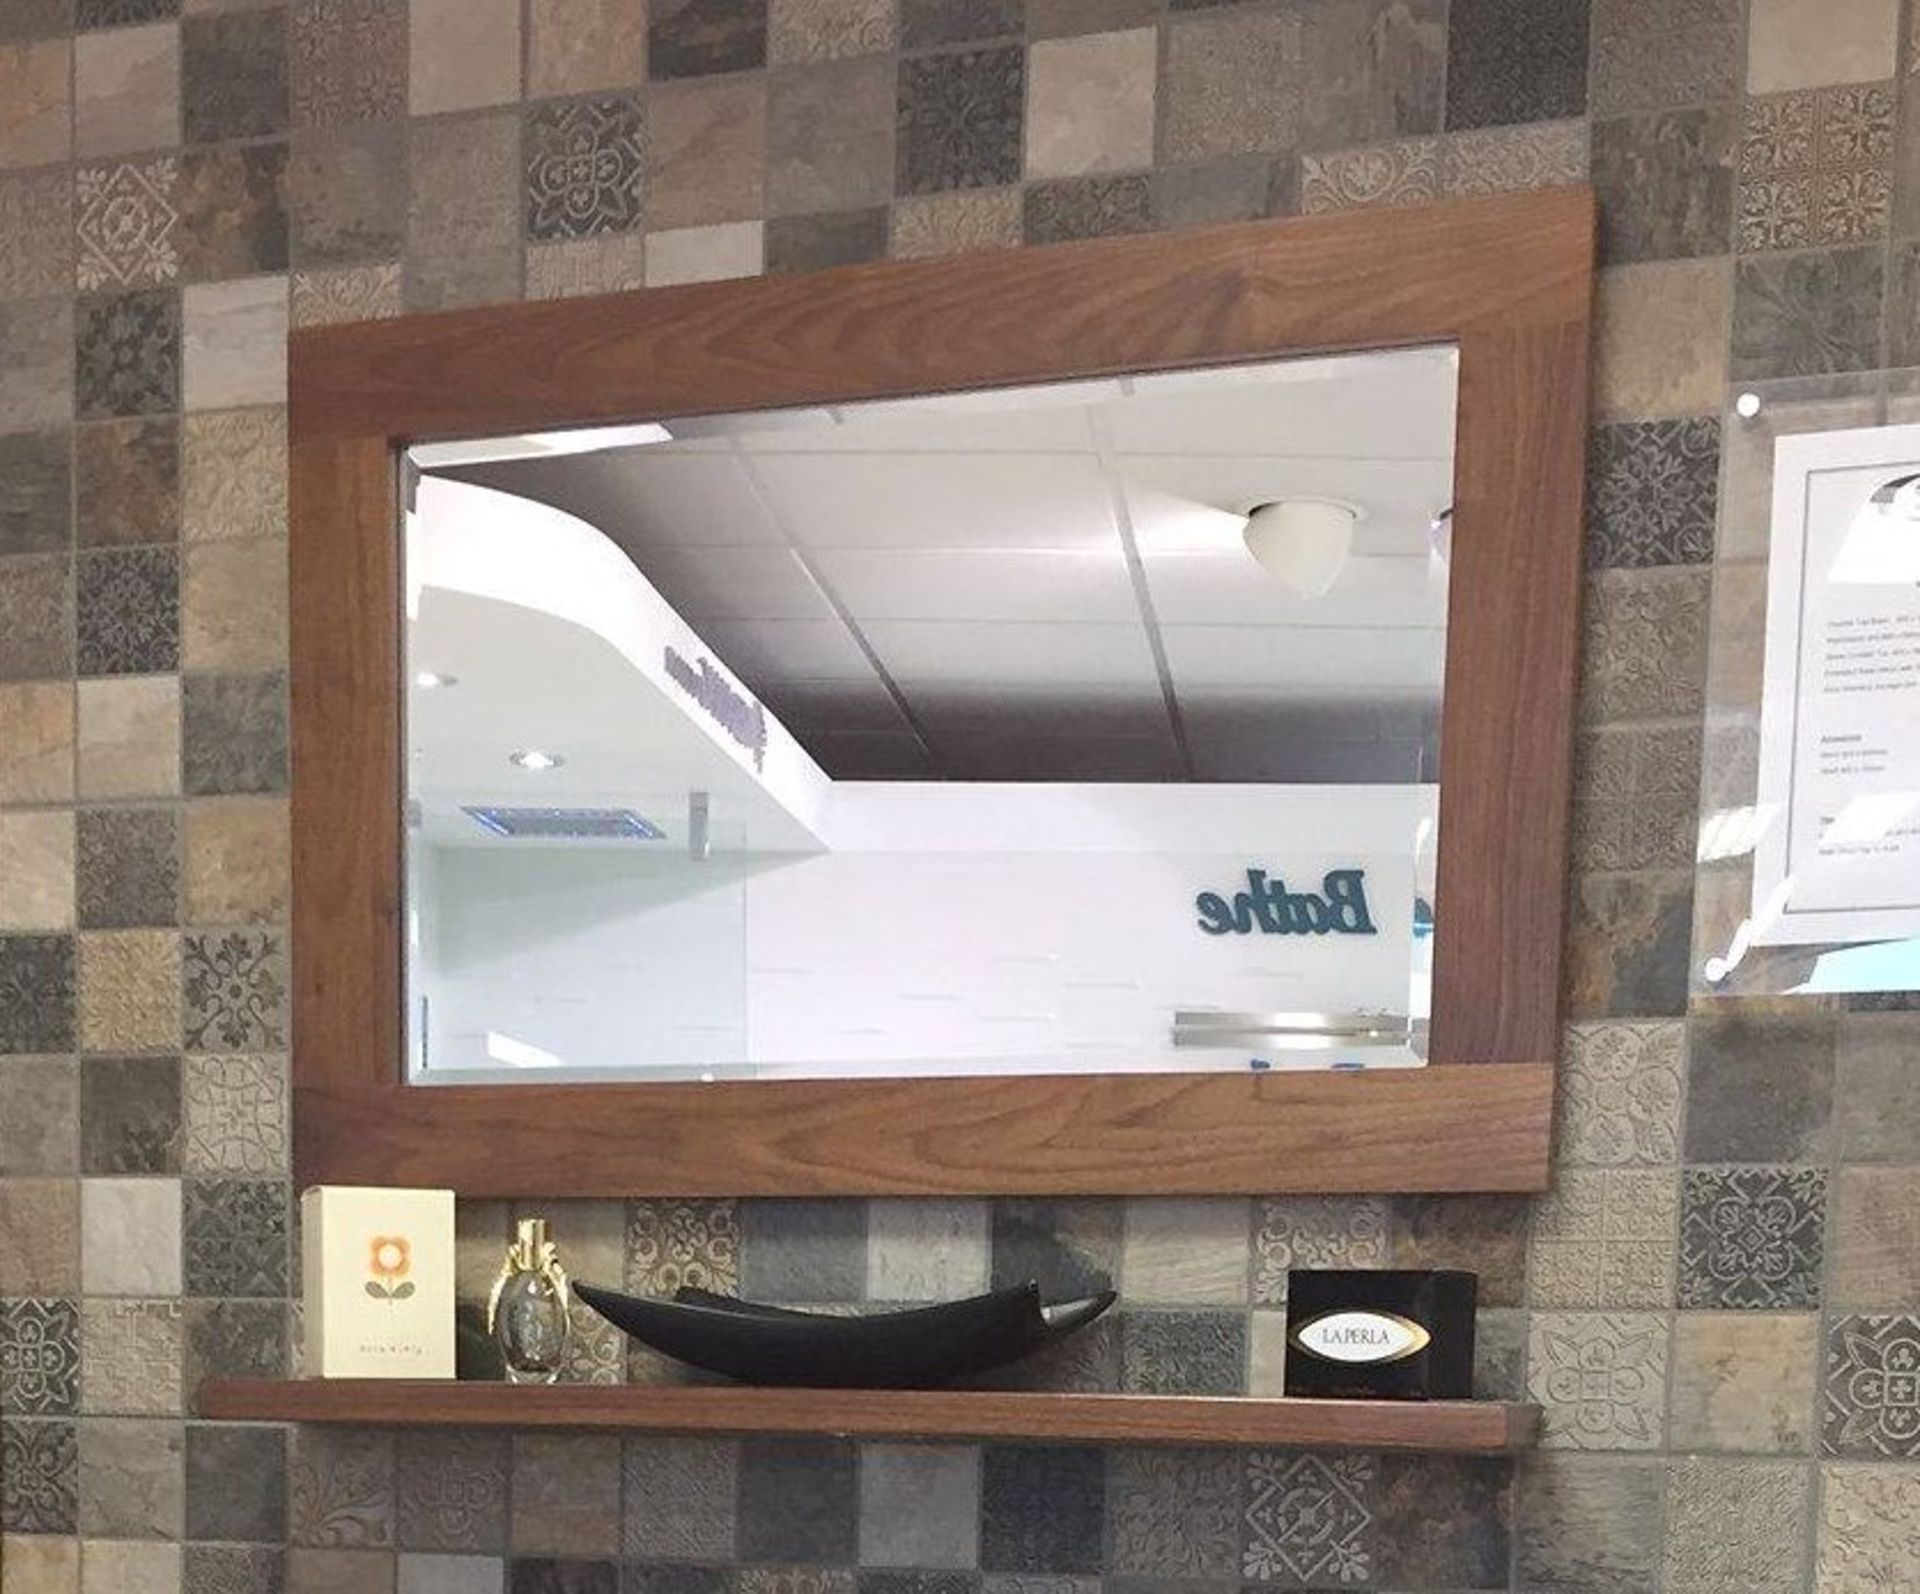 1 x Stonearth Medium Wall Mirror Frame - American Solid Walnut Frame For Mirrors or Pictures - Image 2 of 12